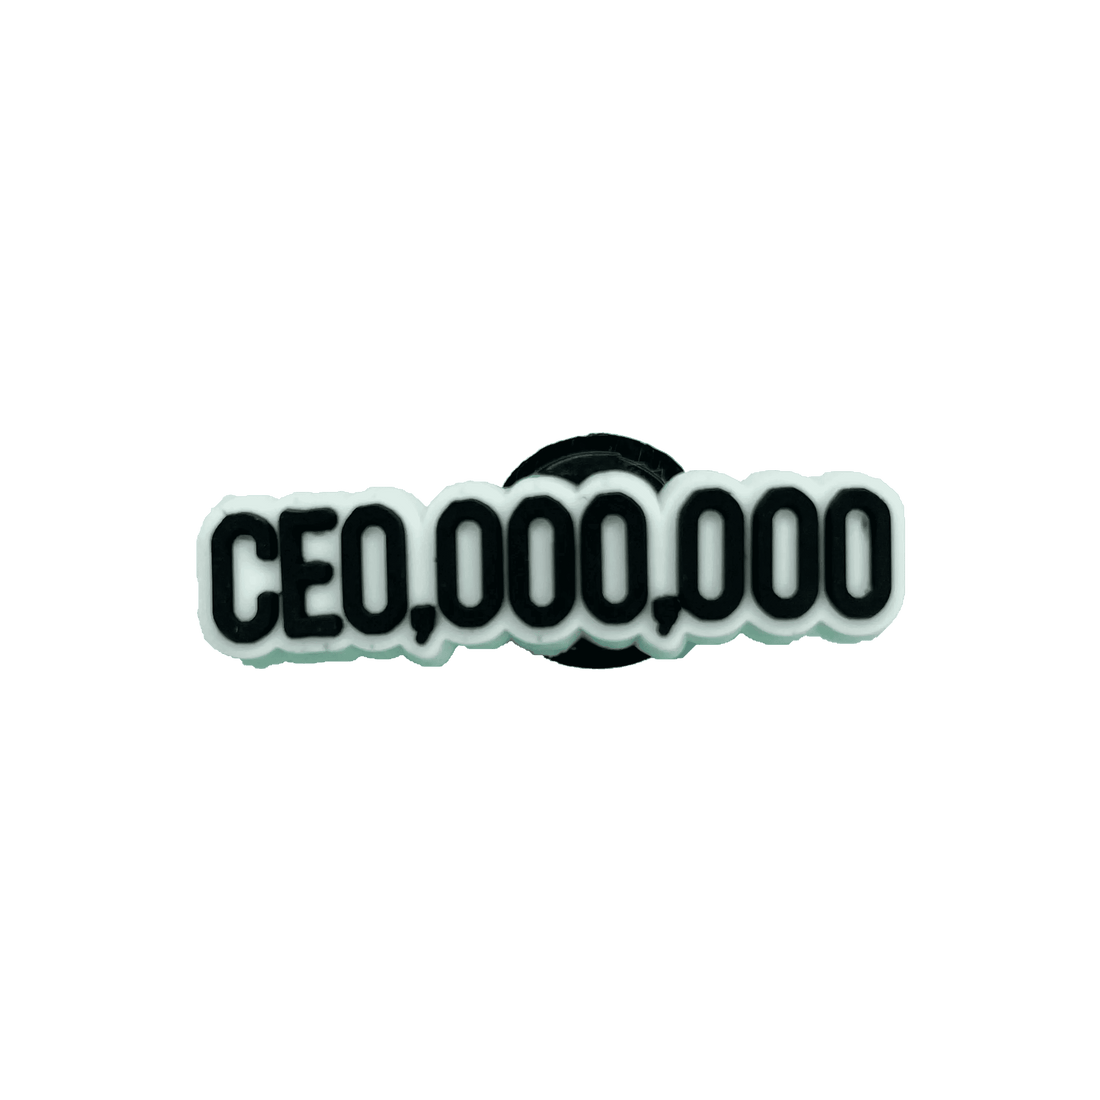 CEO,000,000 Charm Charms By Prince